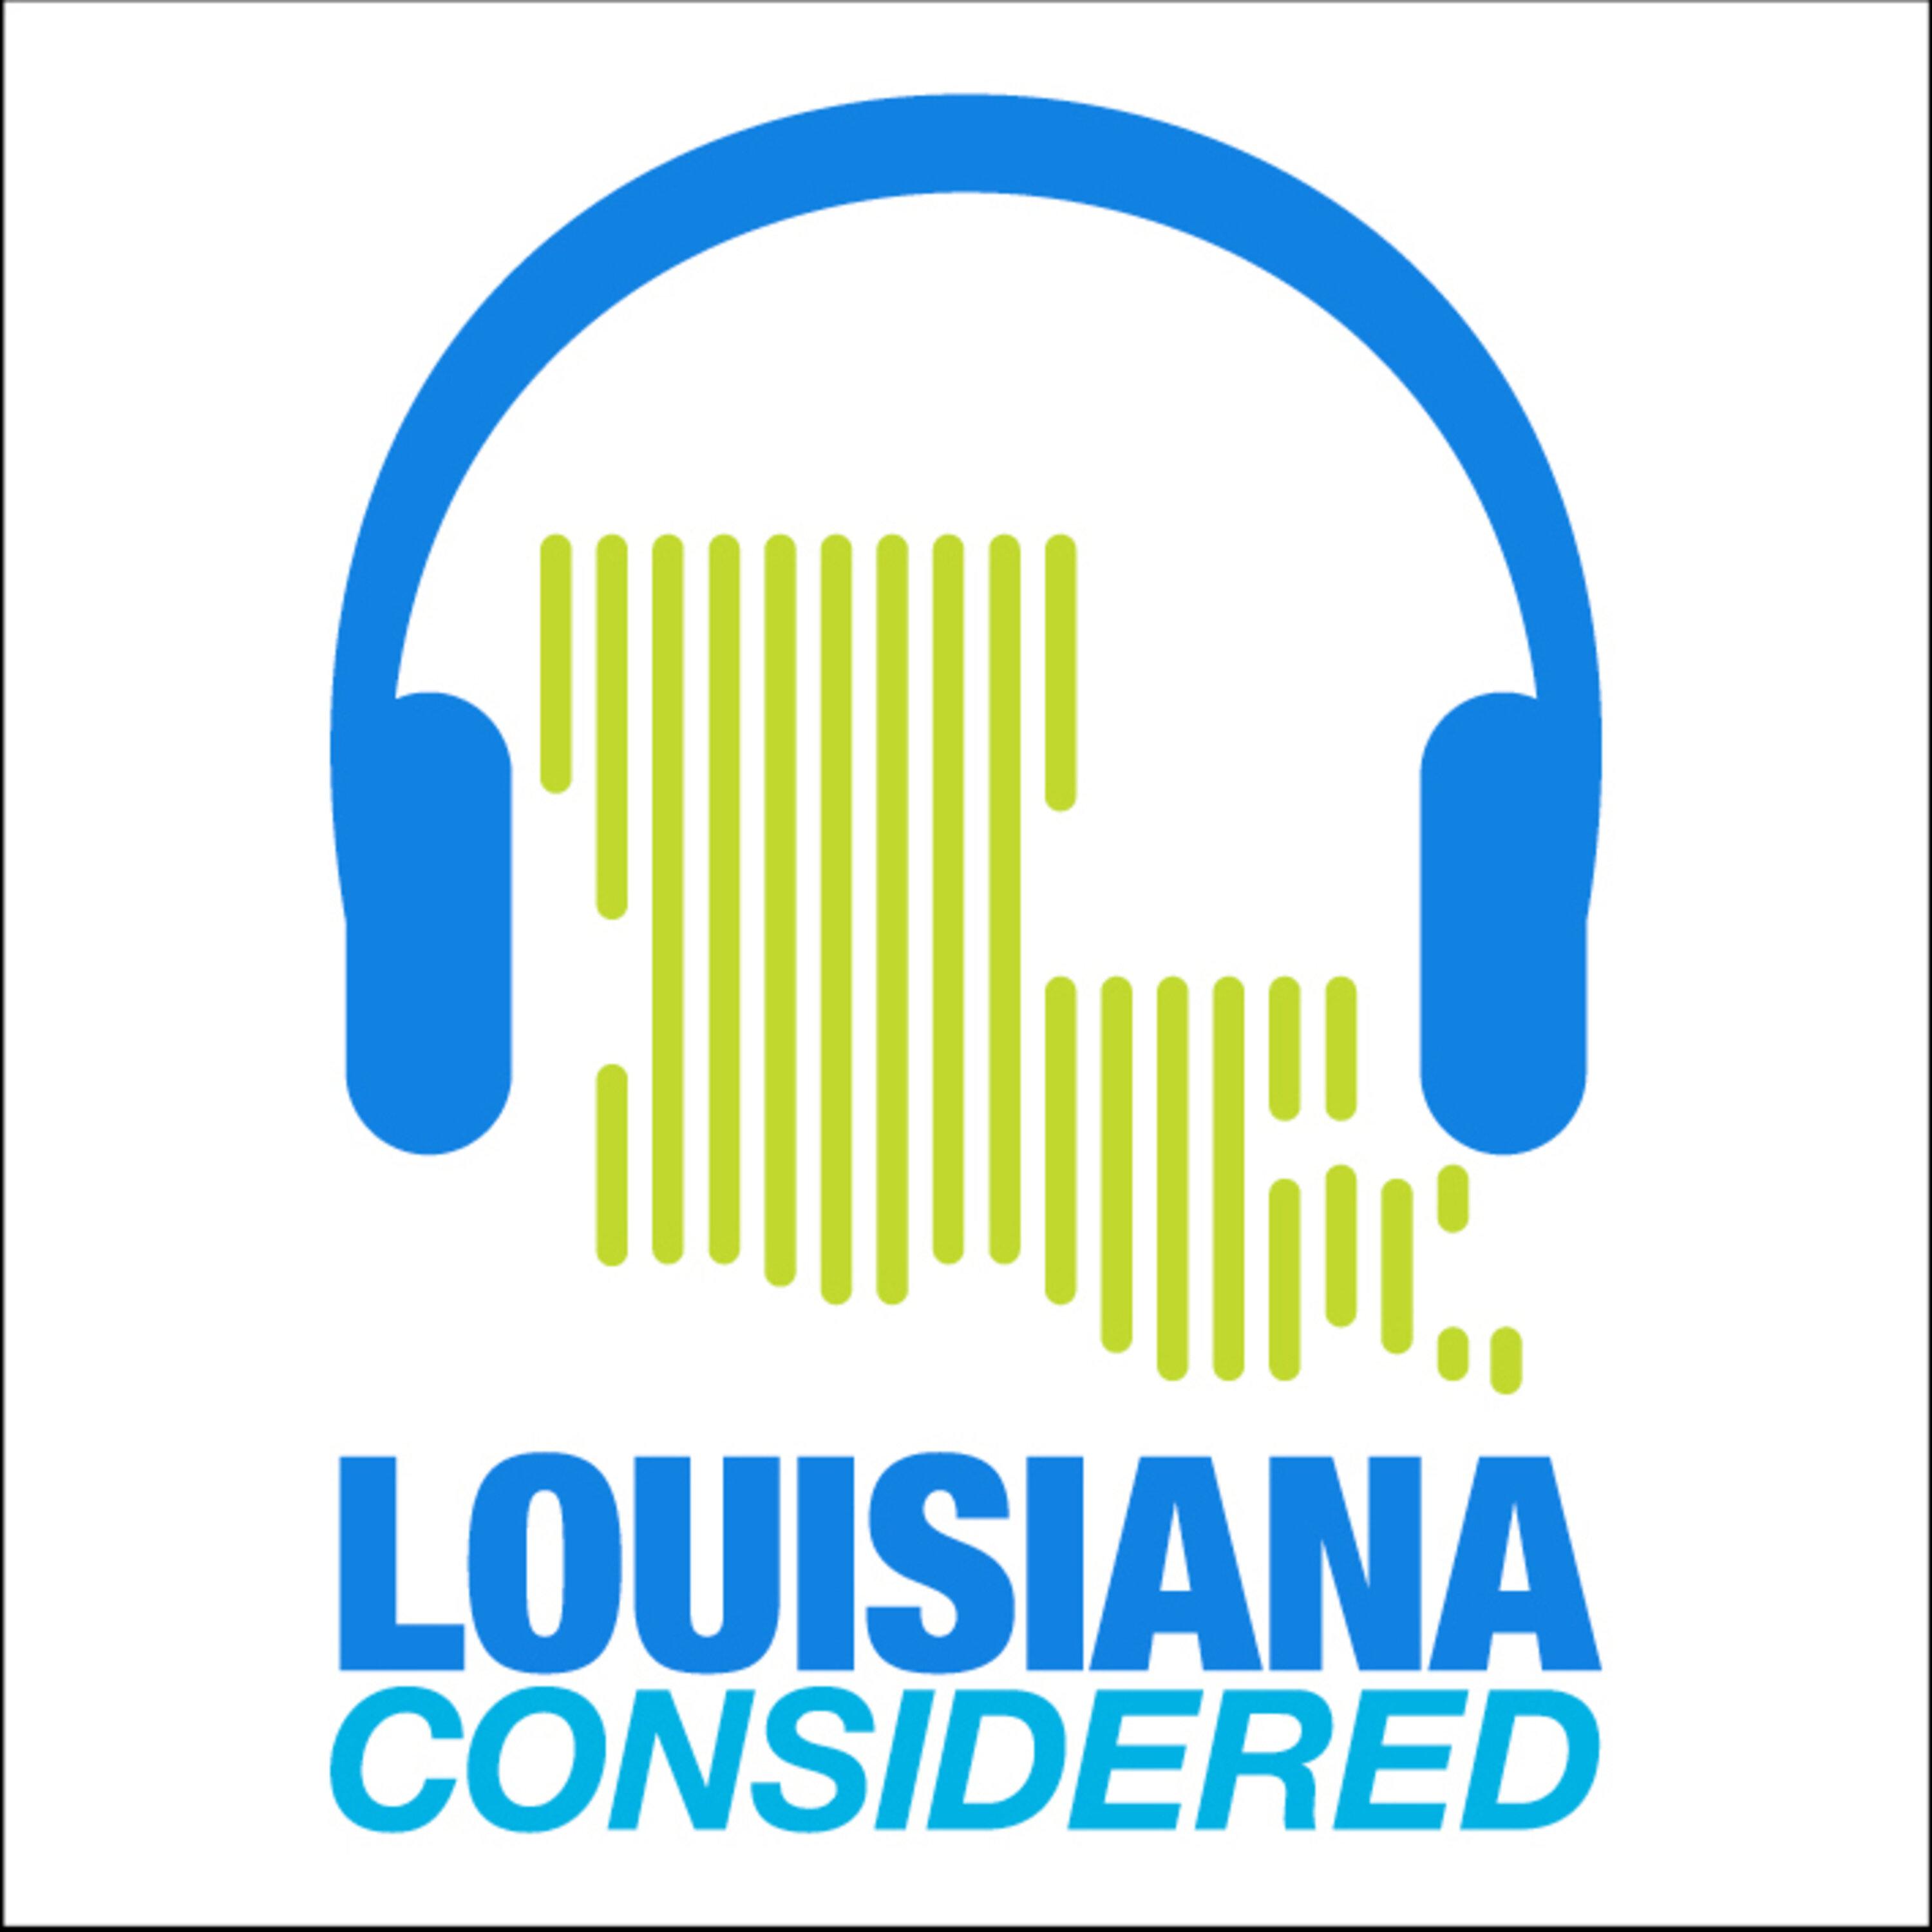 Thumbnail for "How the FDA’s new blood donation guidelines will impact Louisianans".